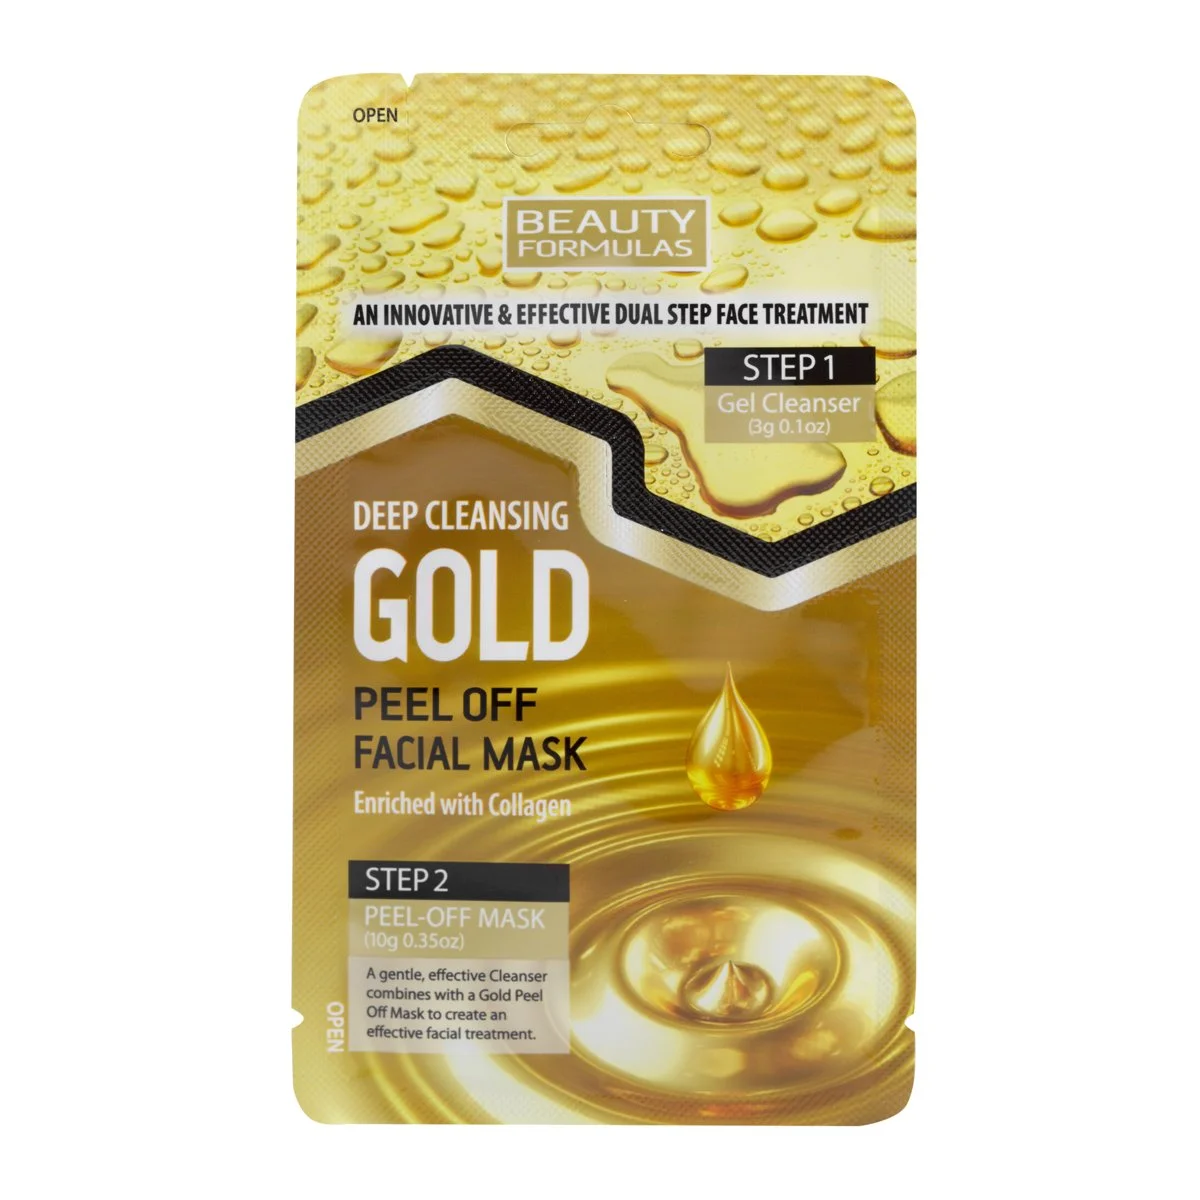 Beauty Formulas Face Mask Gold with Collagen in a sachet of 13gr